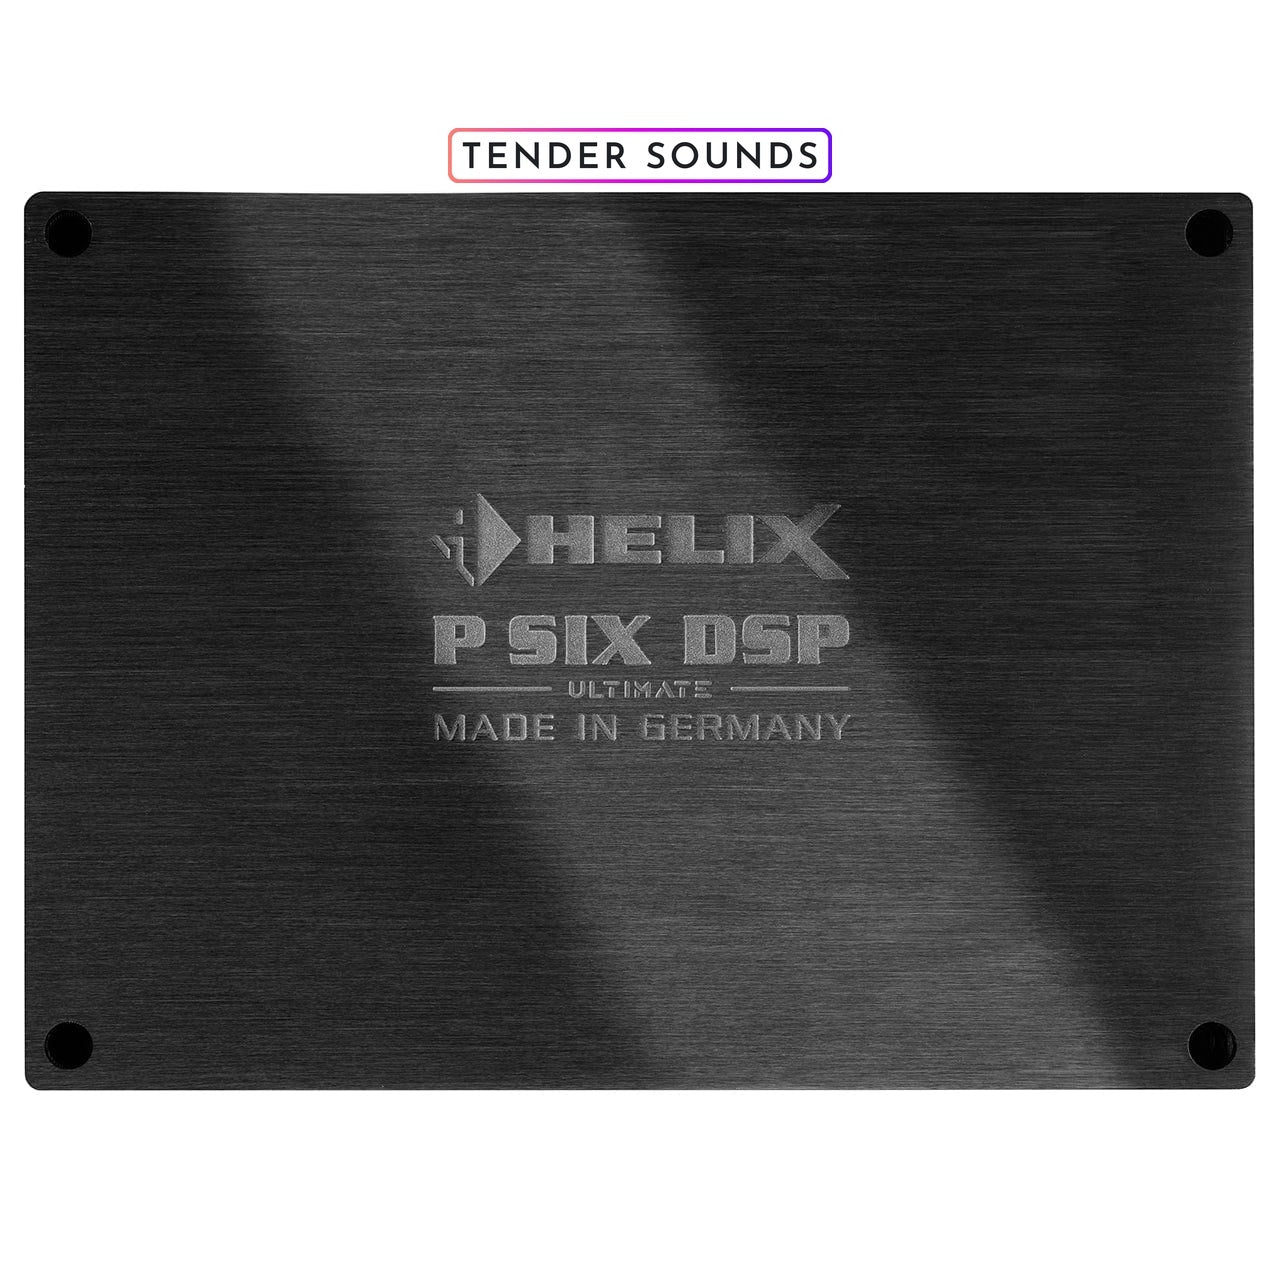 Helix 6-channel amplifier with integrated 8-channel DSP